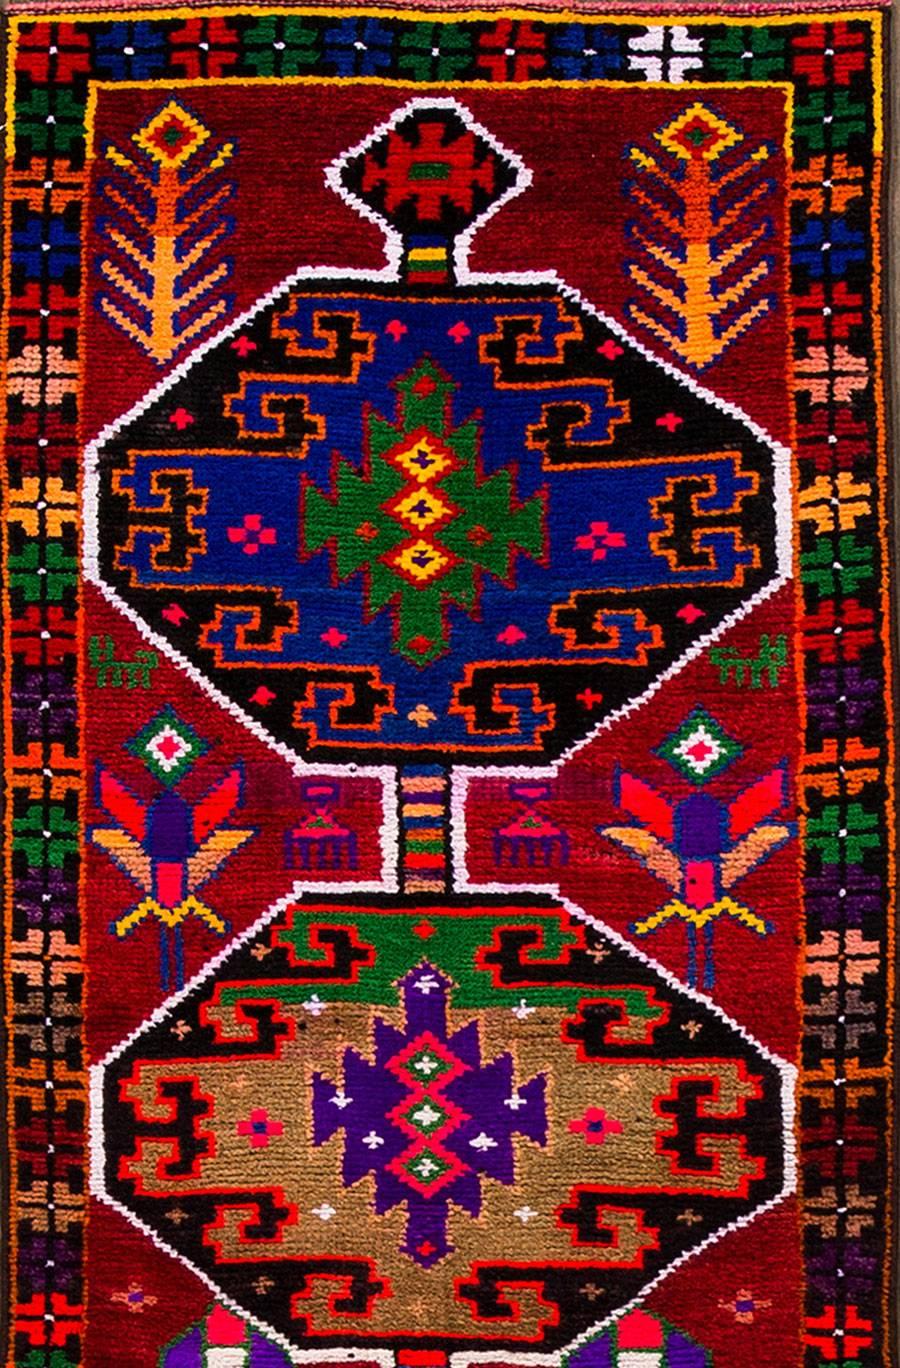 Hand-Knotted Vintage Red Tribal Turkish Runner Rug, 2.05x10.08